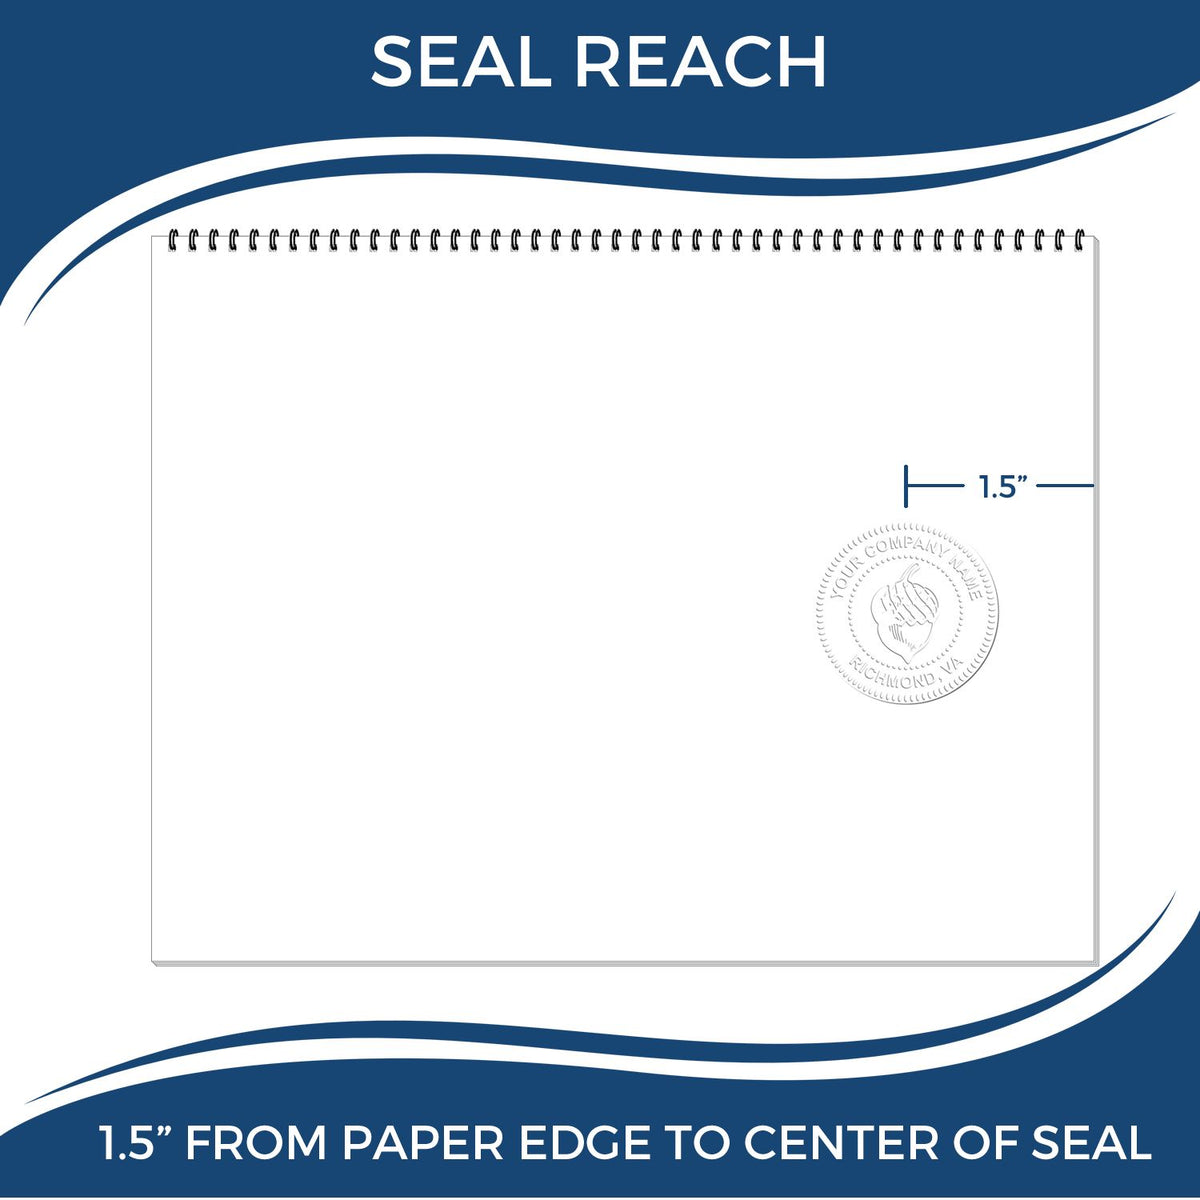 An infographic showing the seal reach which is represented by a ruler and a miniature seal image of the Handheld Mississippi Professional Geologist Embosser